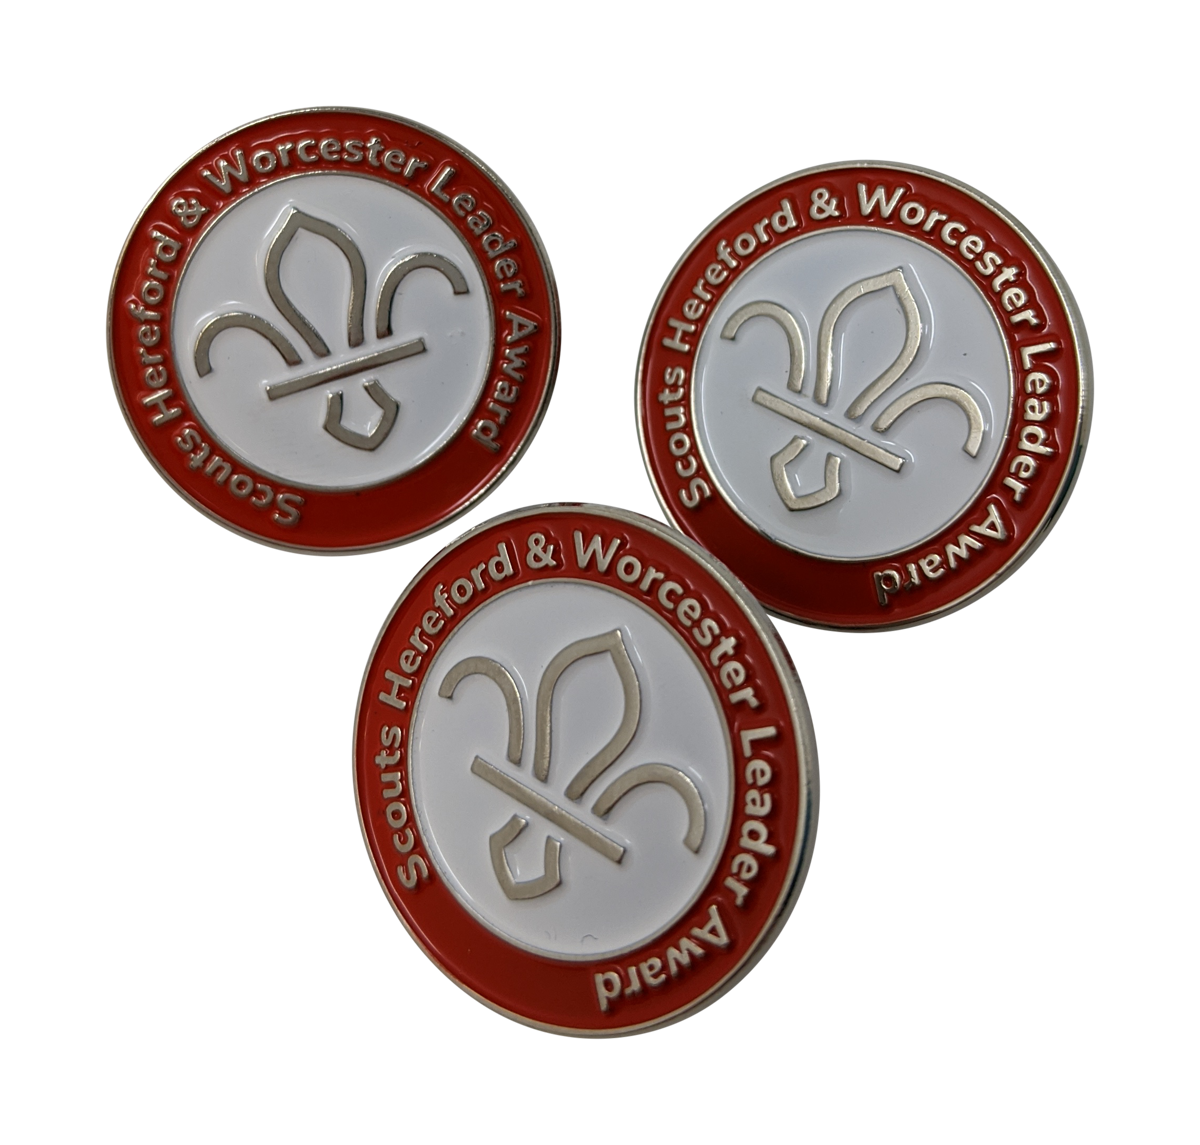 Hereford and Worcester Scouts pin badge